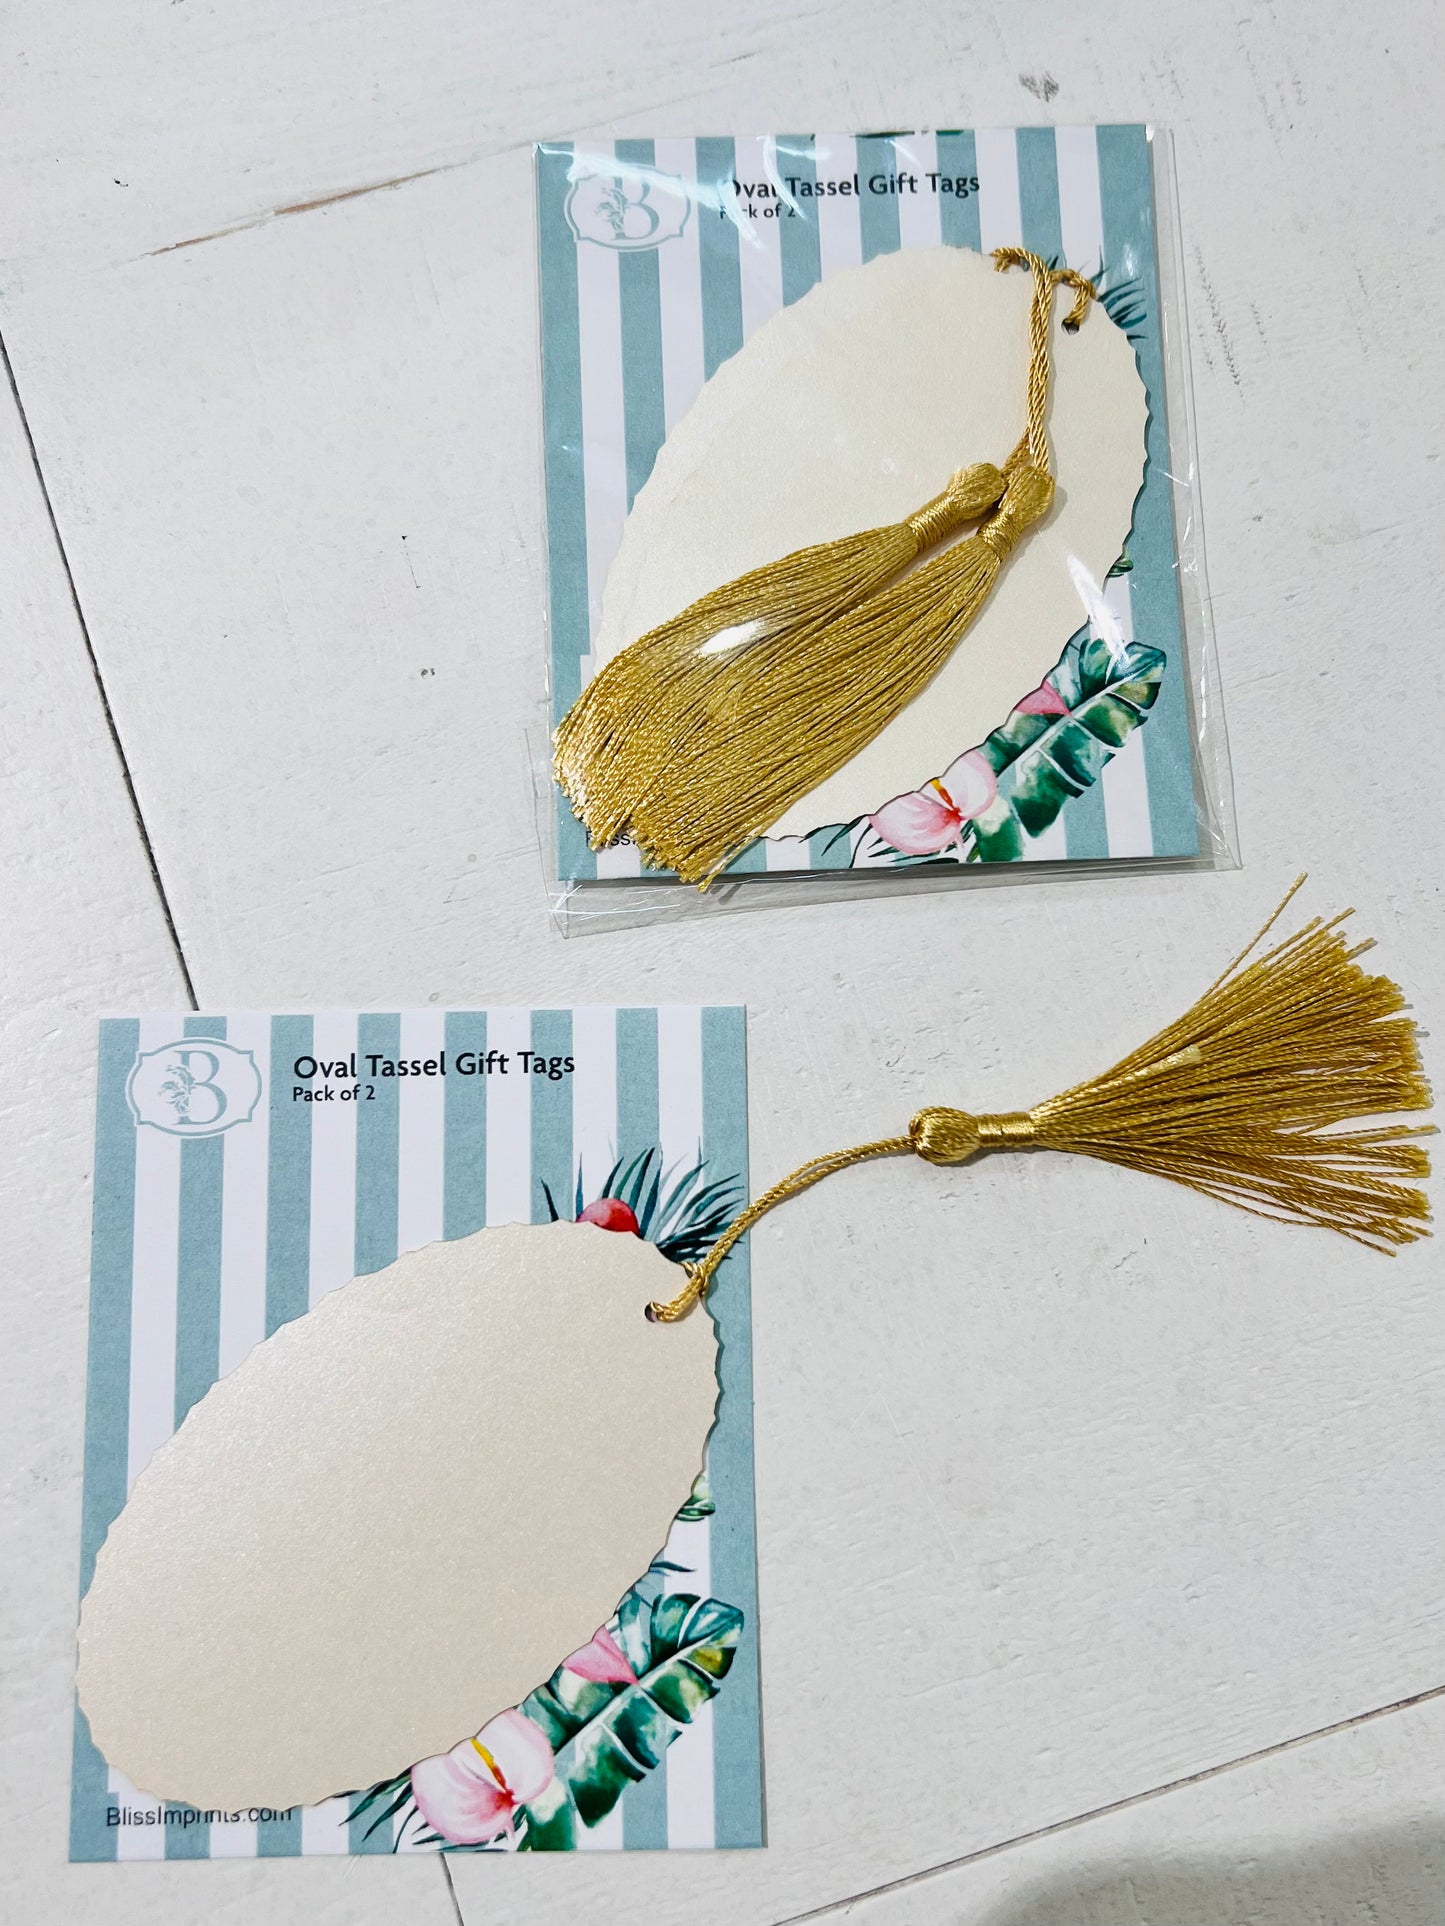 Oval Tassel Gift Tags Pack 2